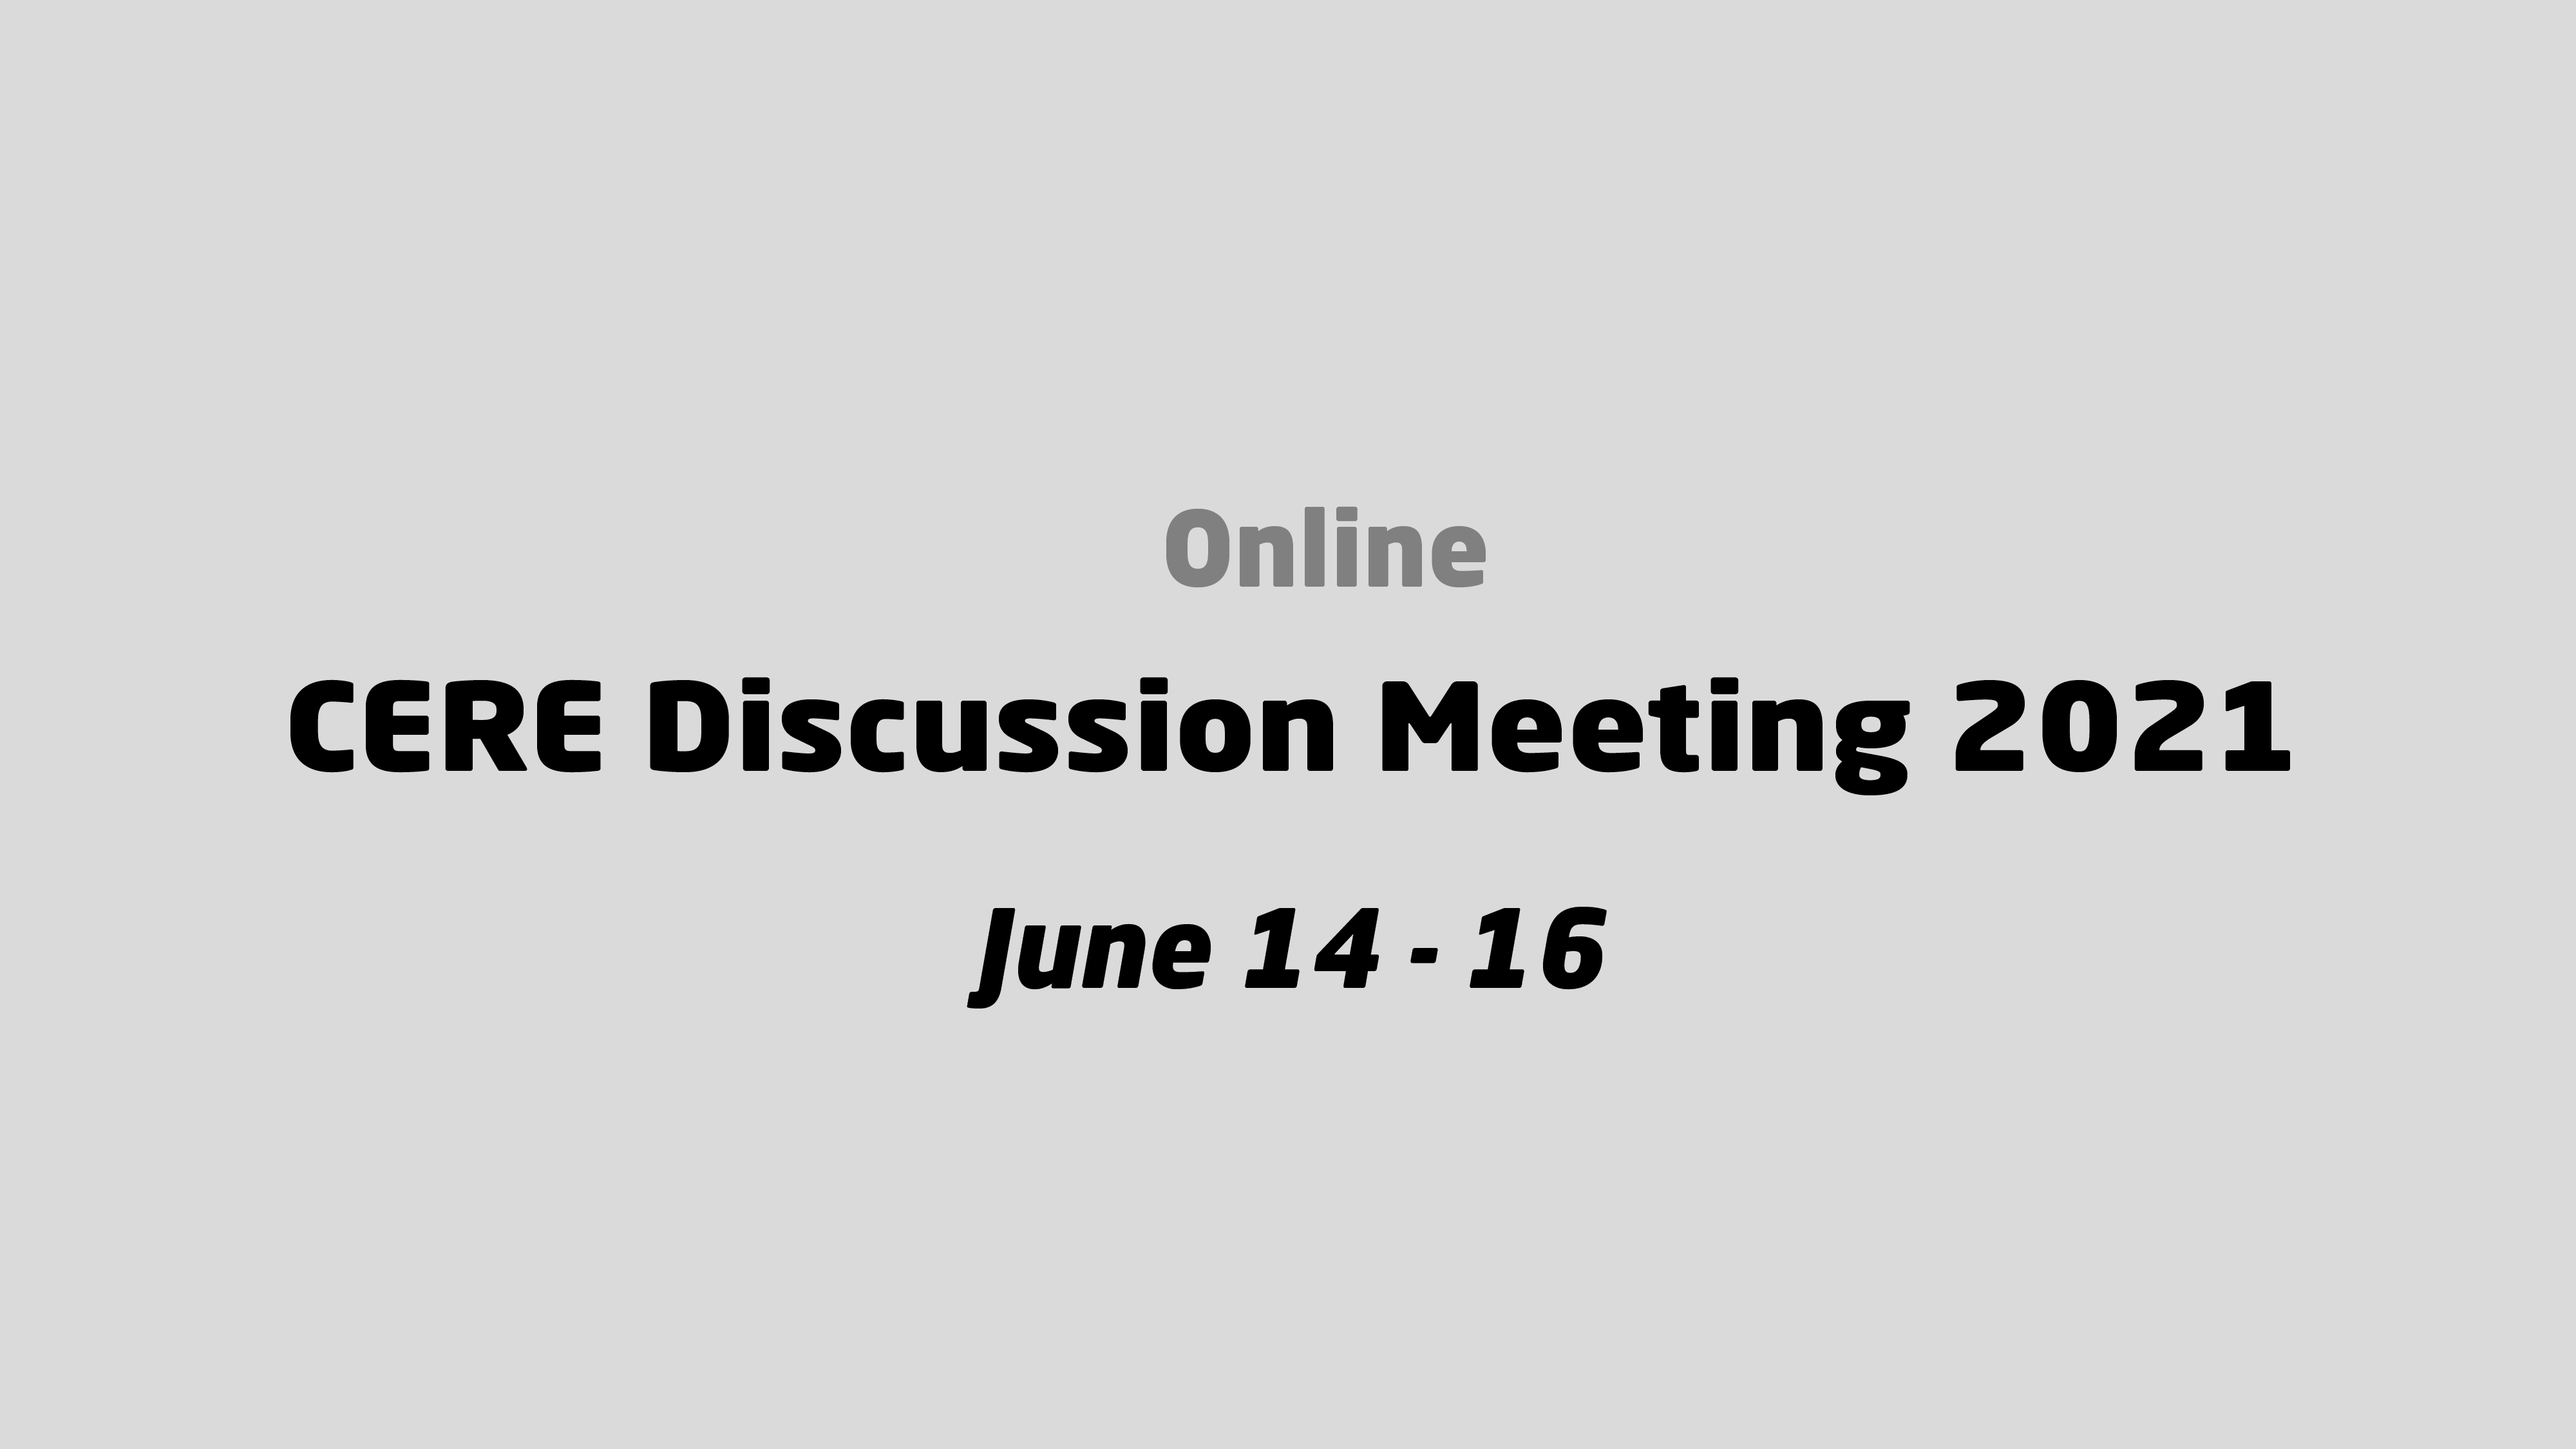 CERE Discussion Meeting 2021